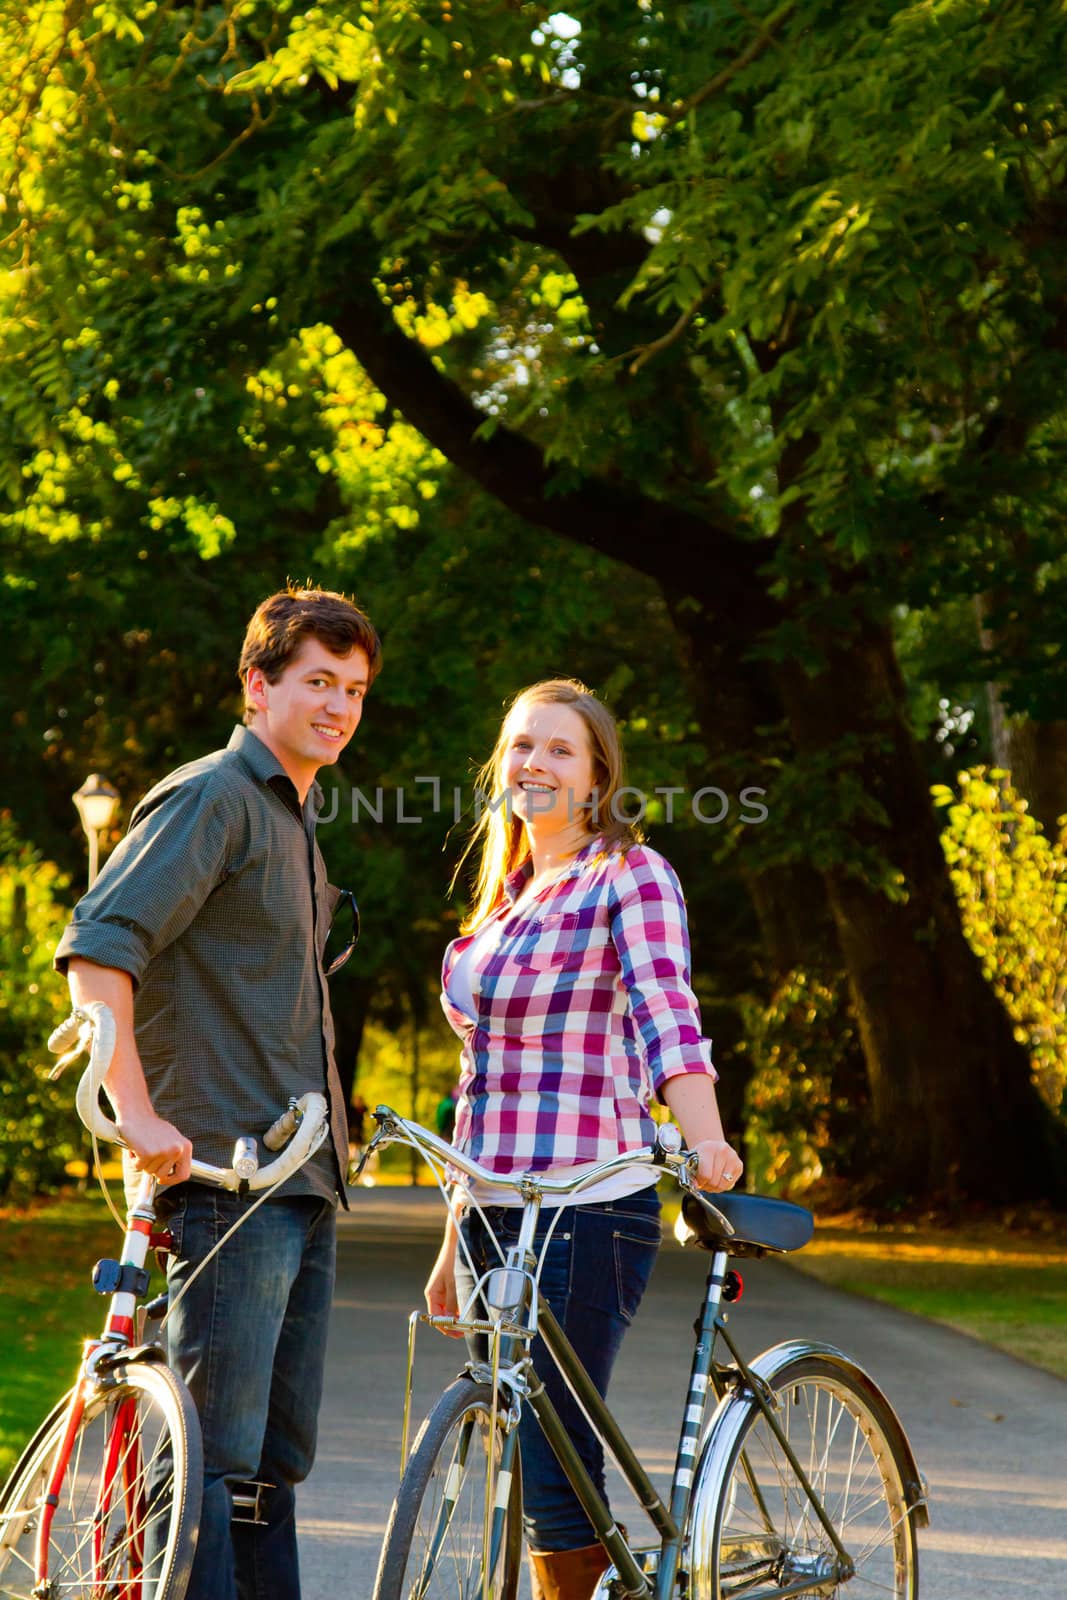 Couple with Bikes by joshuaraineyphotography